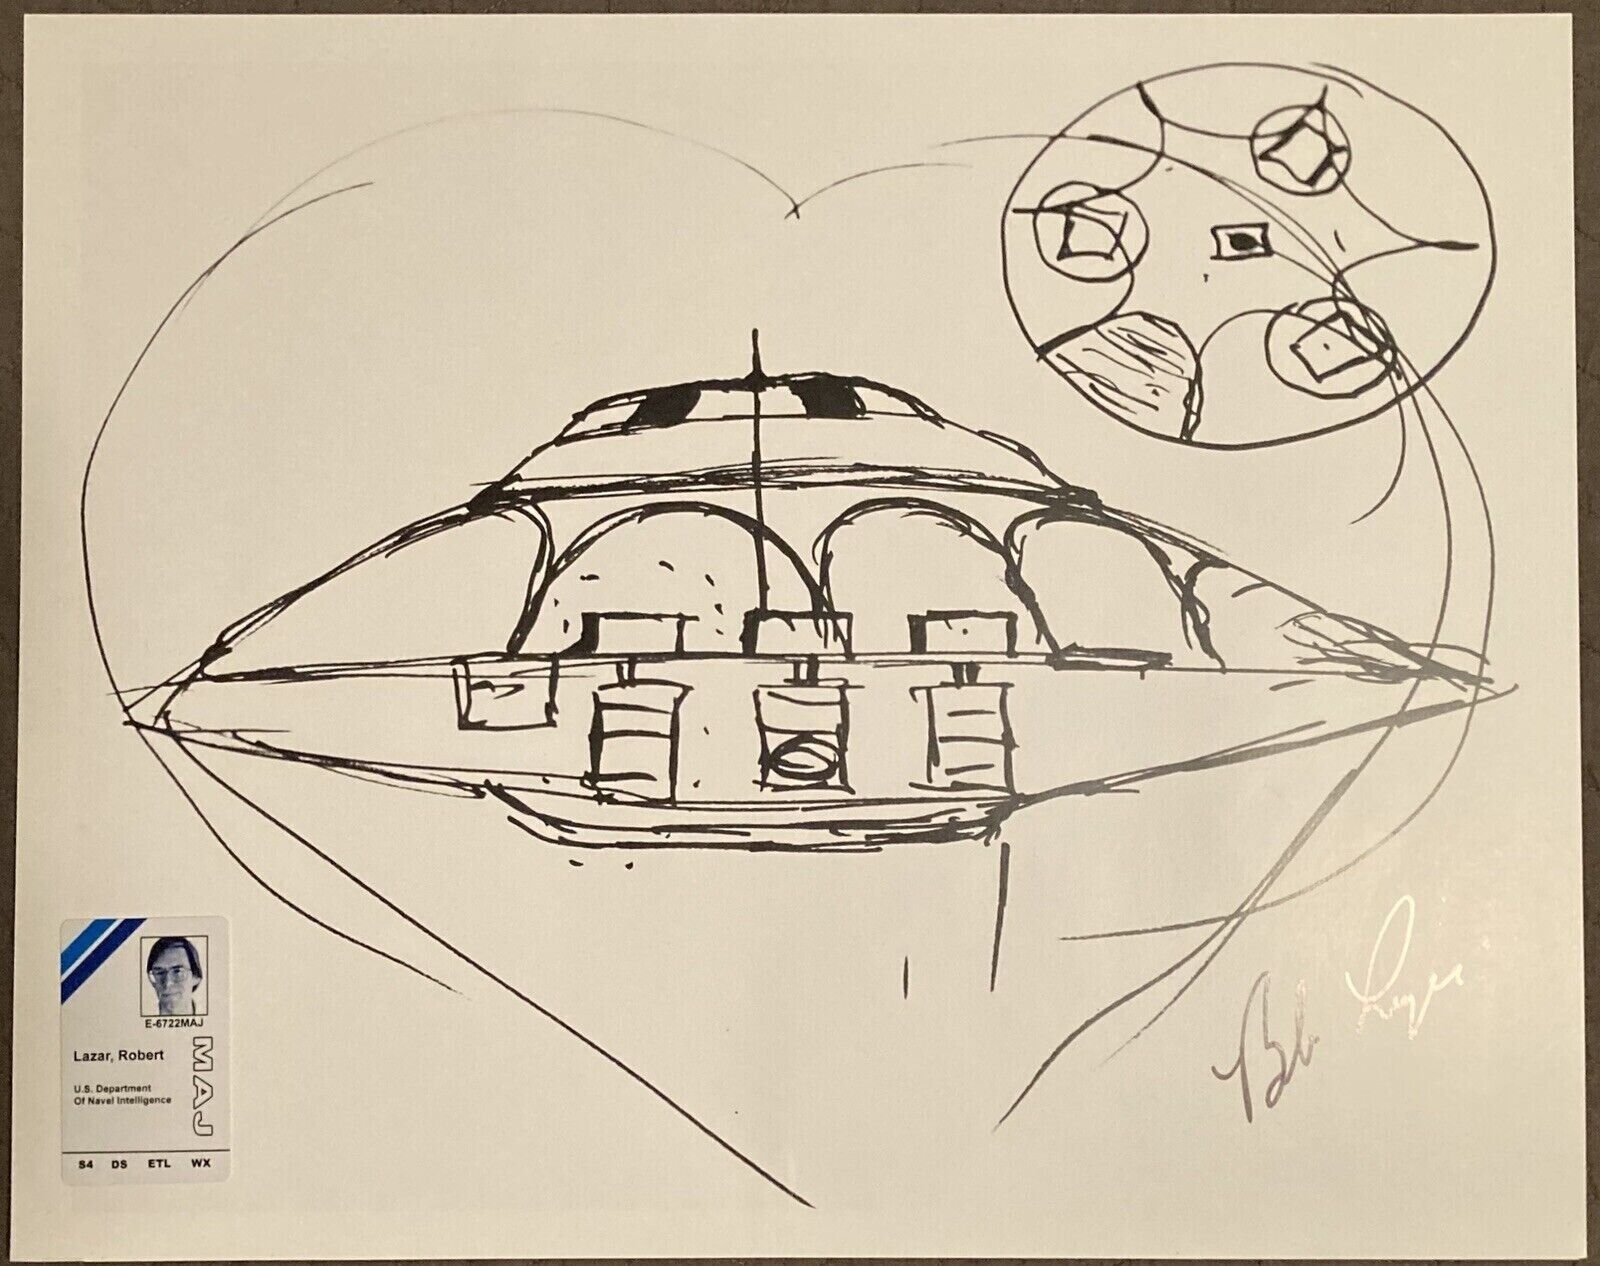 UFO PHOTO 8.5X11 AREA 51 BOB LAZAR AUTOGRAPH SIGNED FLYING SAUCER POSTER REPRINT